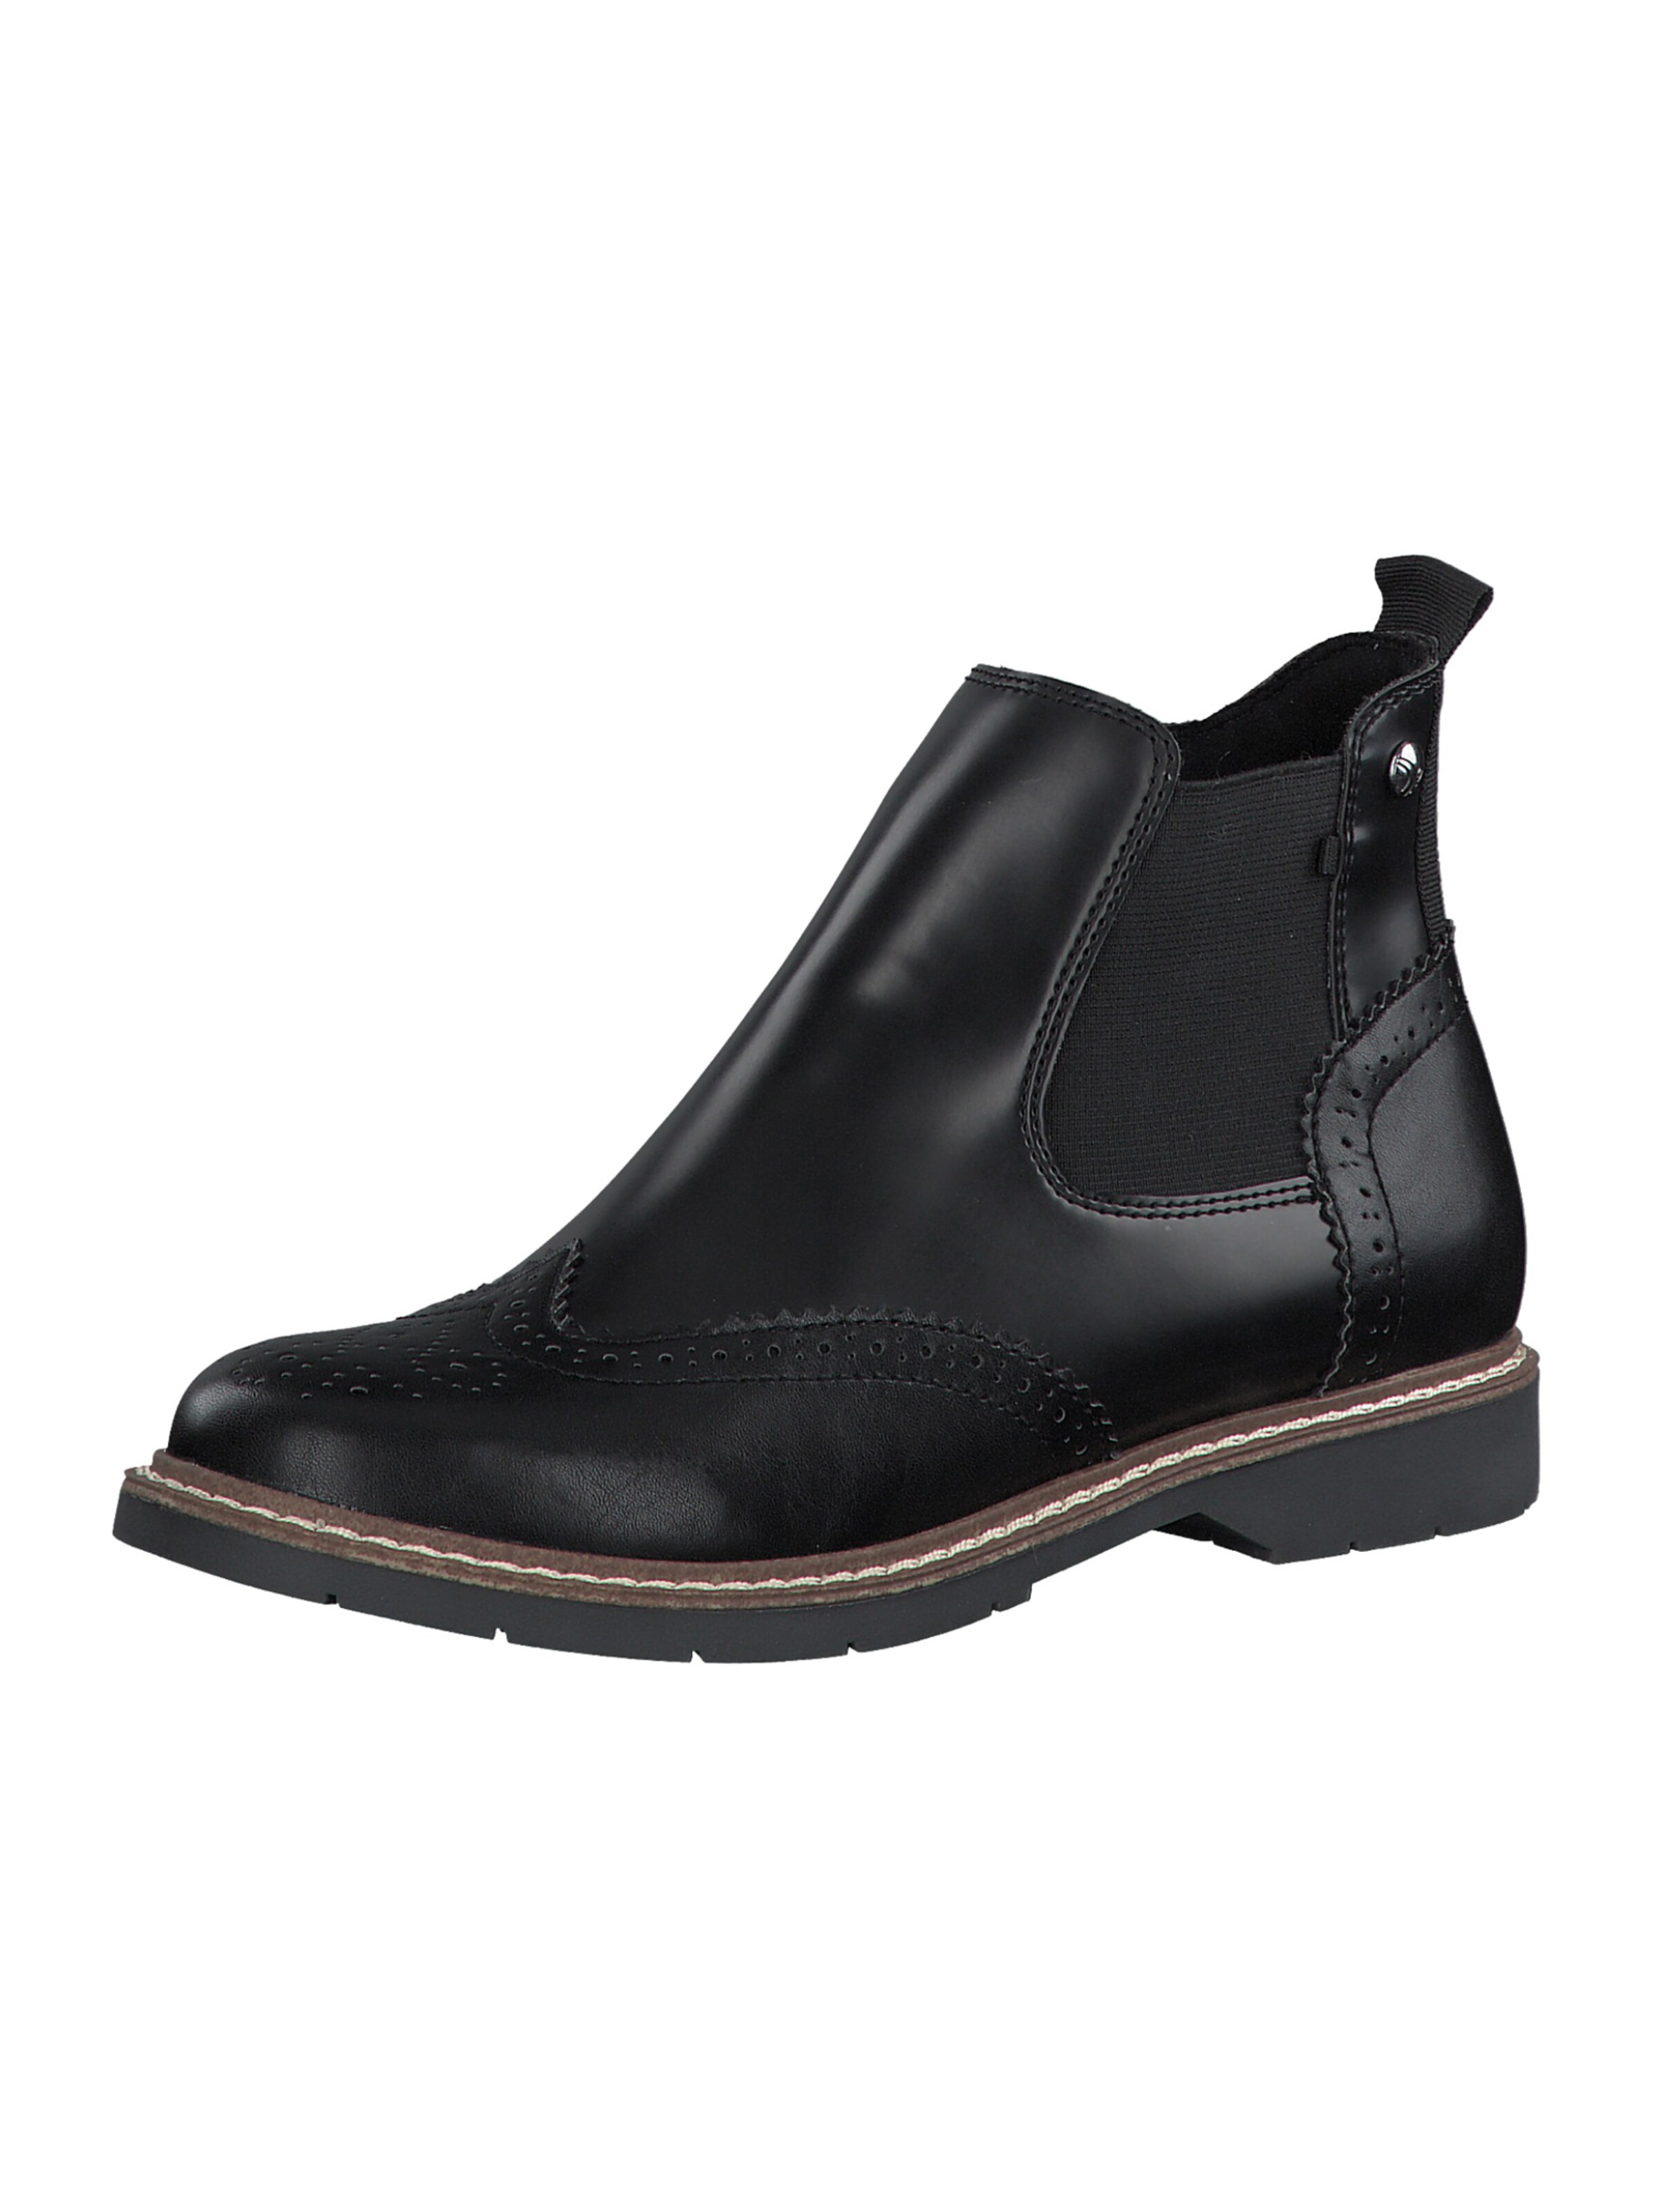 s.Oliver Chelsea boots in Black | ABOUT YOU